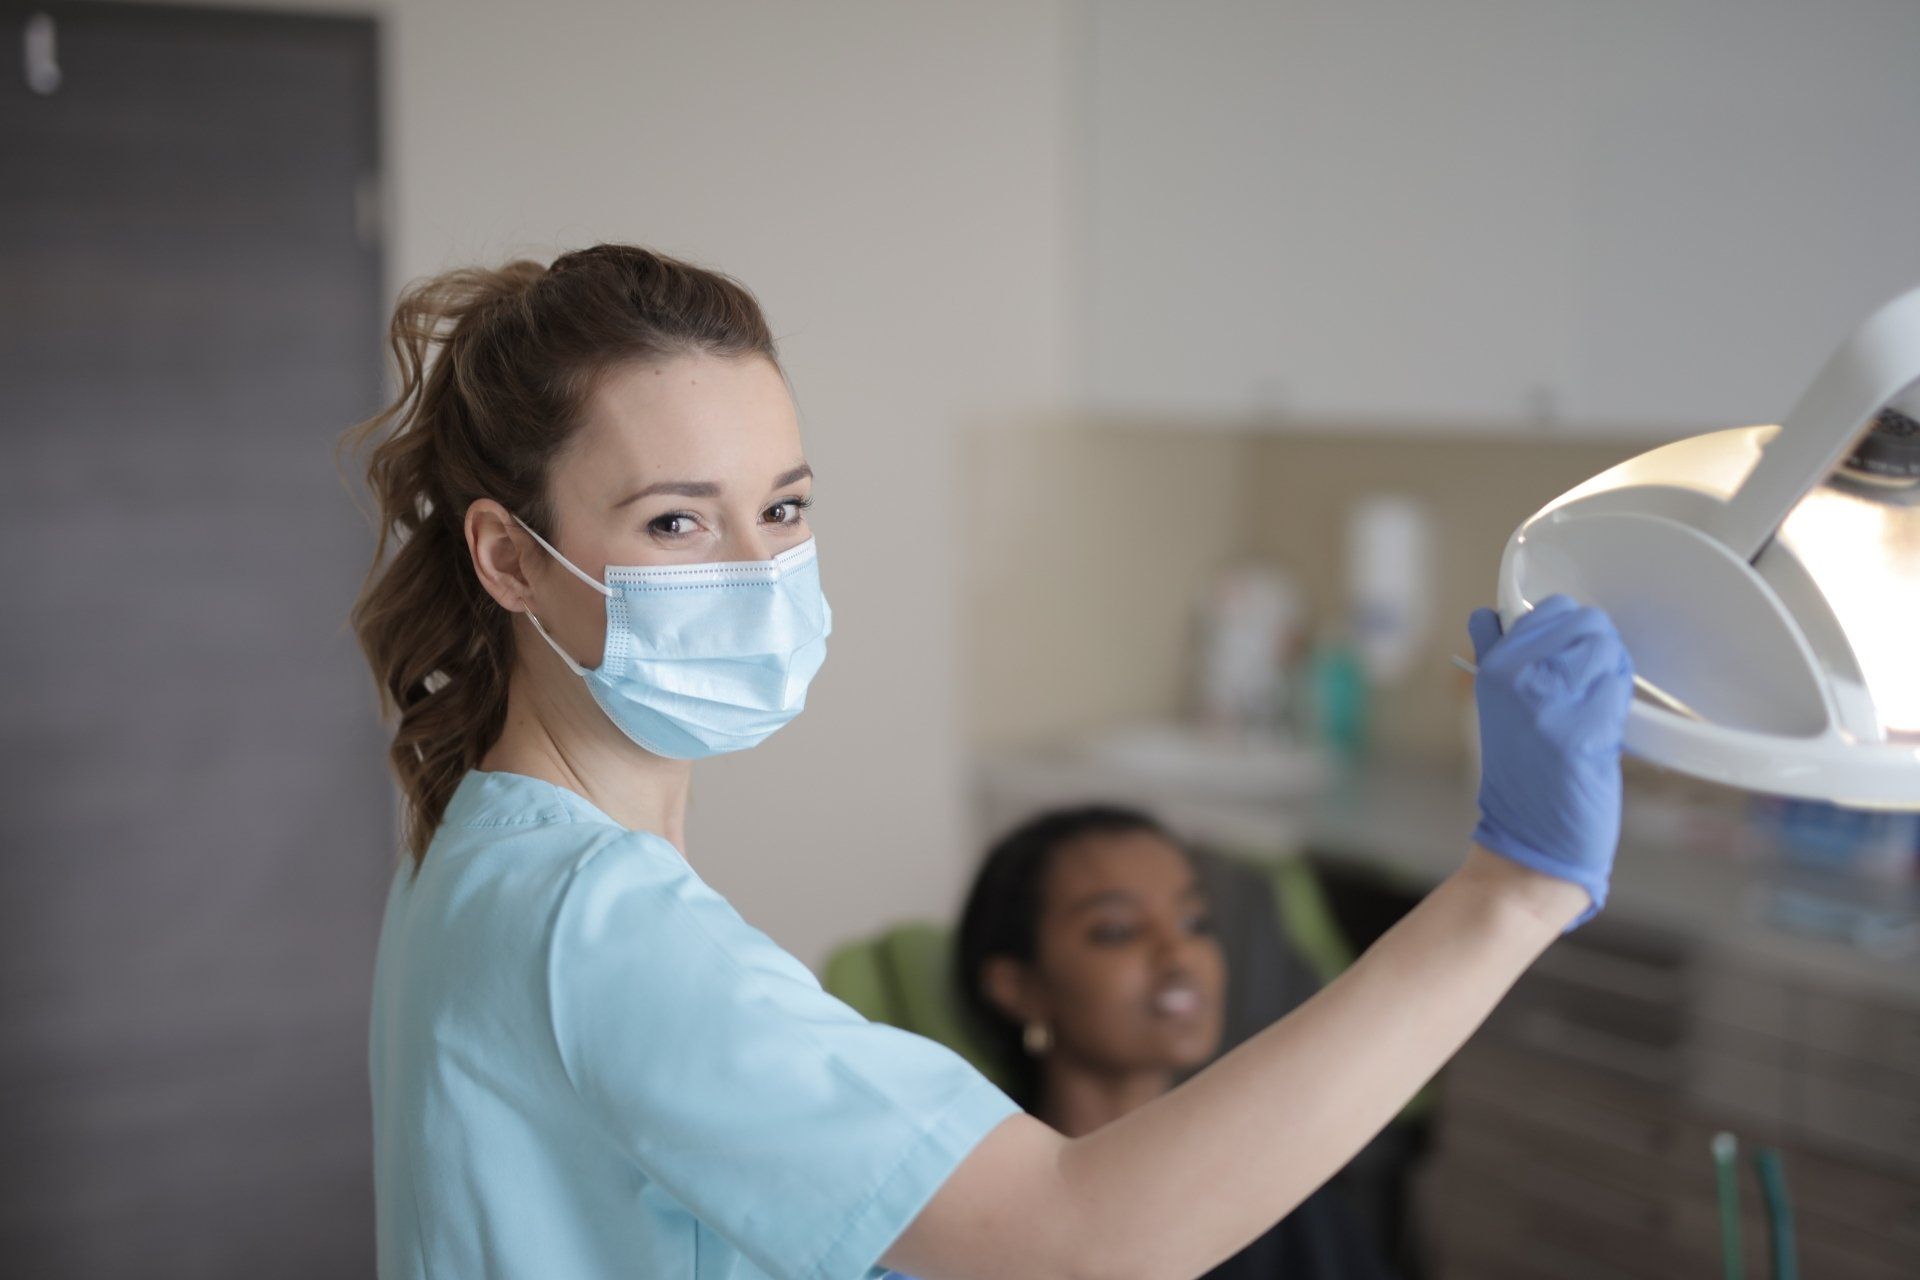 Dentist holding inspection light in dental office with patient out of focus in the background